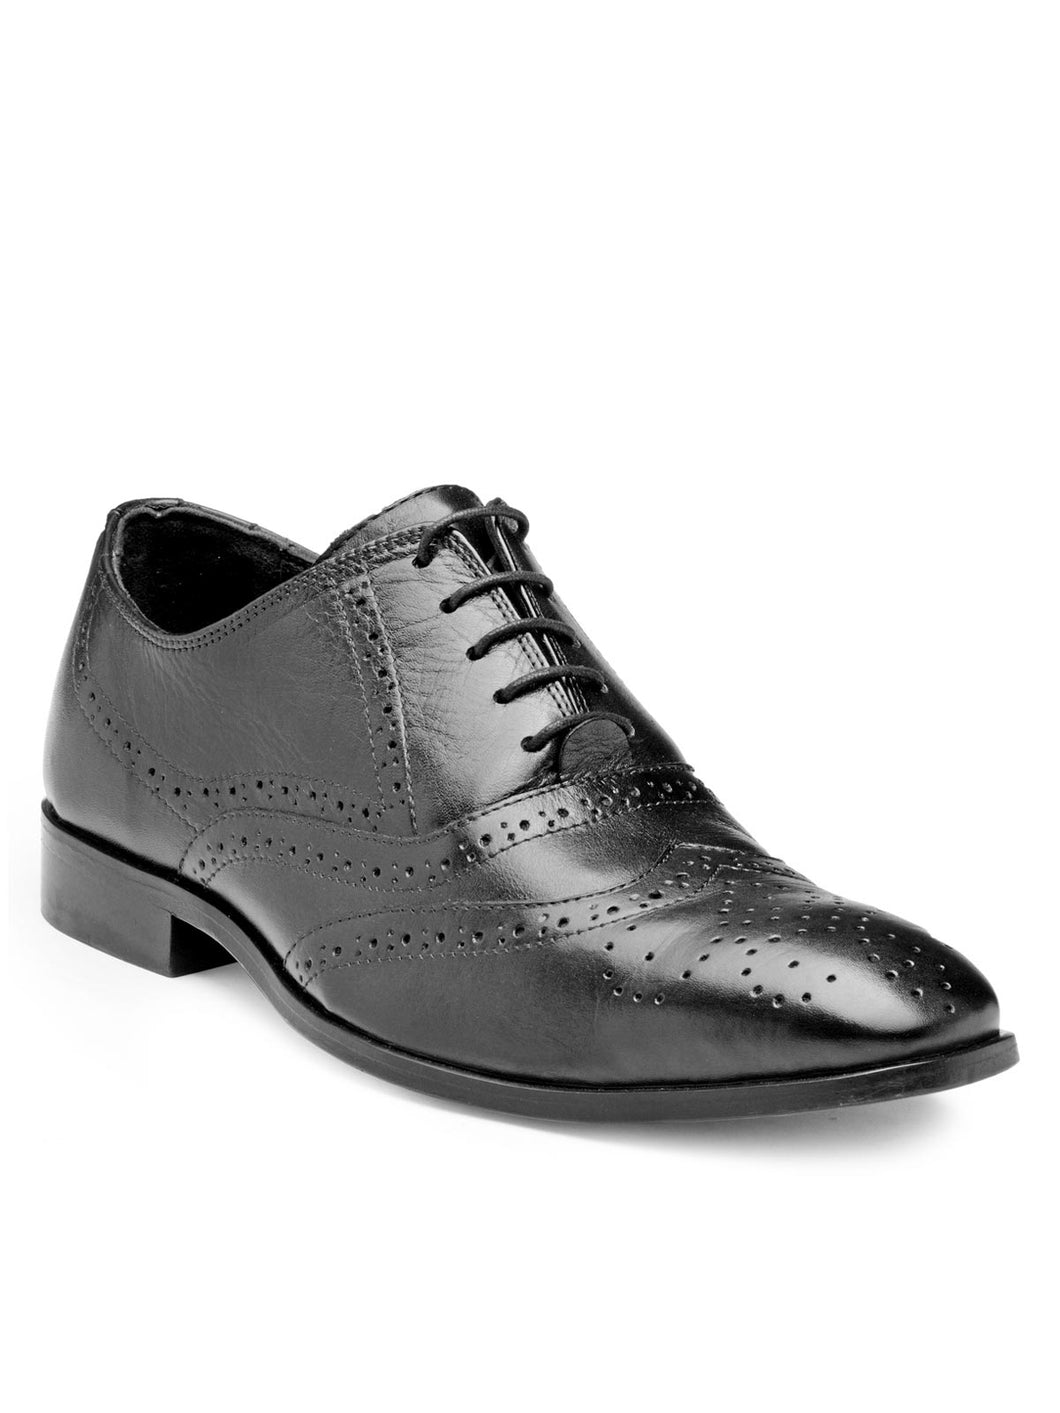 Teakwood Genuine Leather Oxford Shoes Shoes